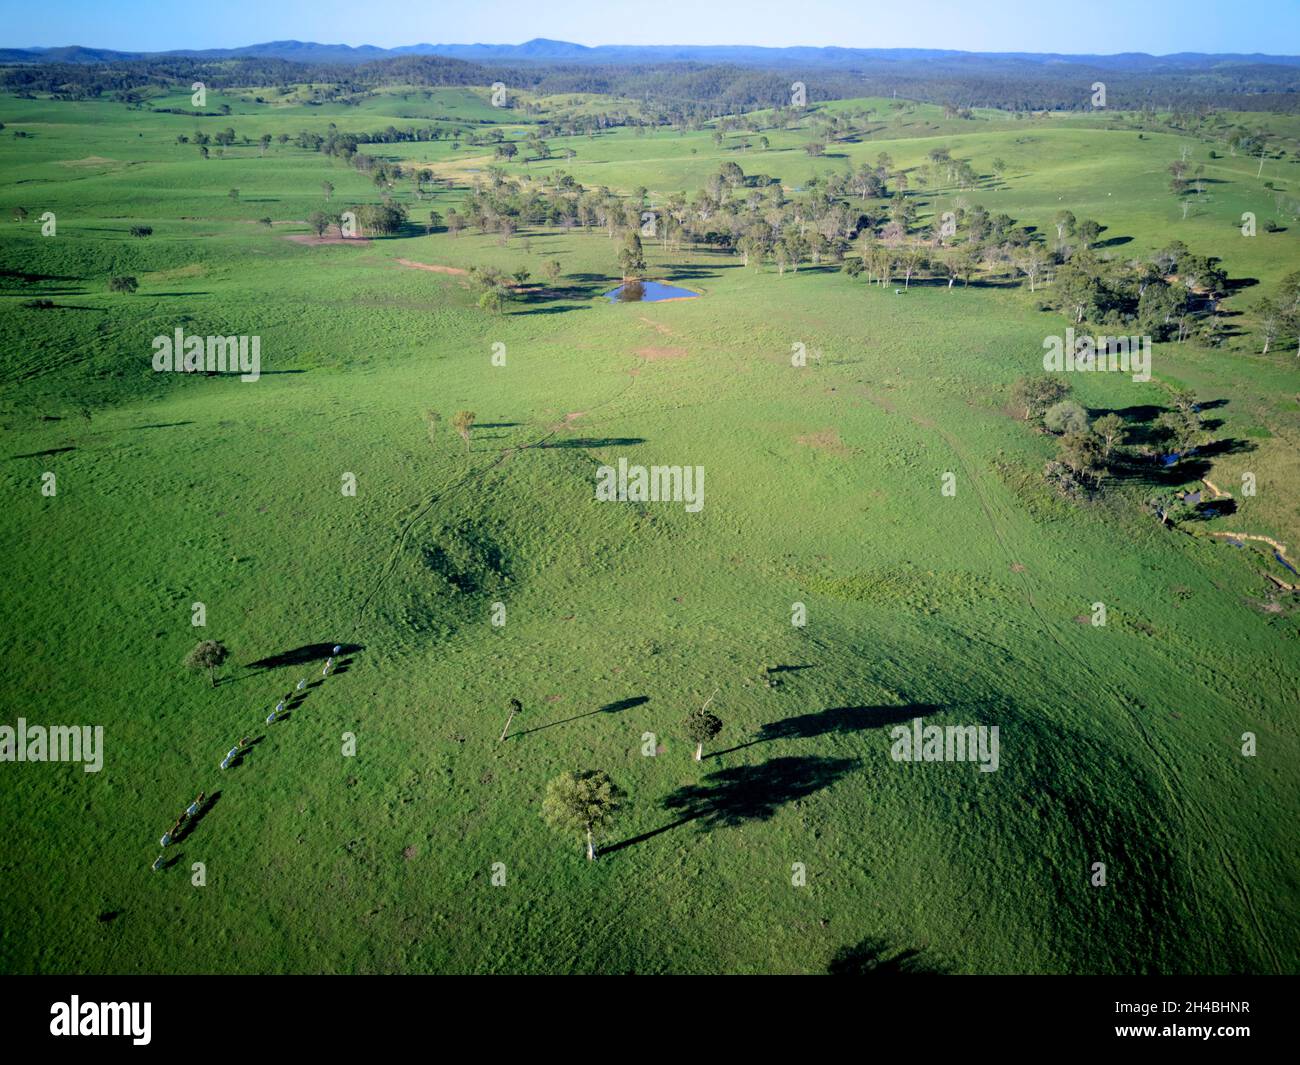 Aerial of rolling green hills of pastoral landscape for cattle grazing at Boompa near Biggenden Queensland Australia Stock Photo